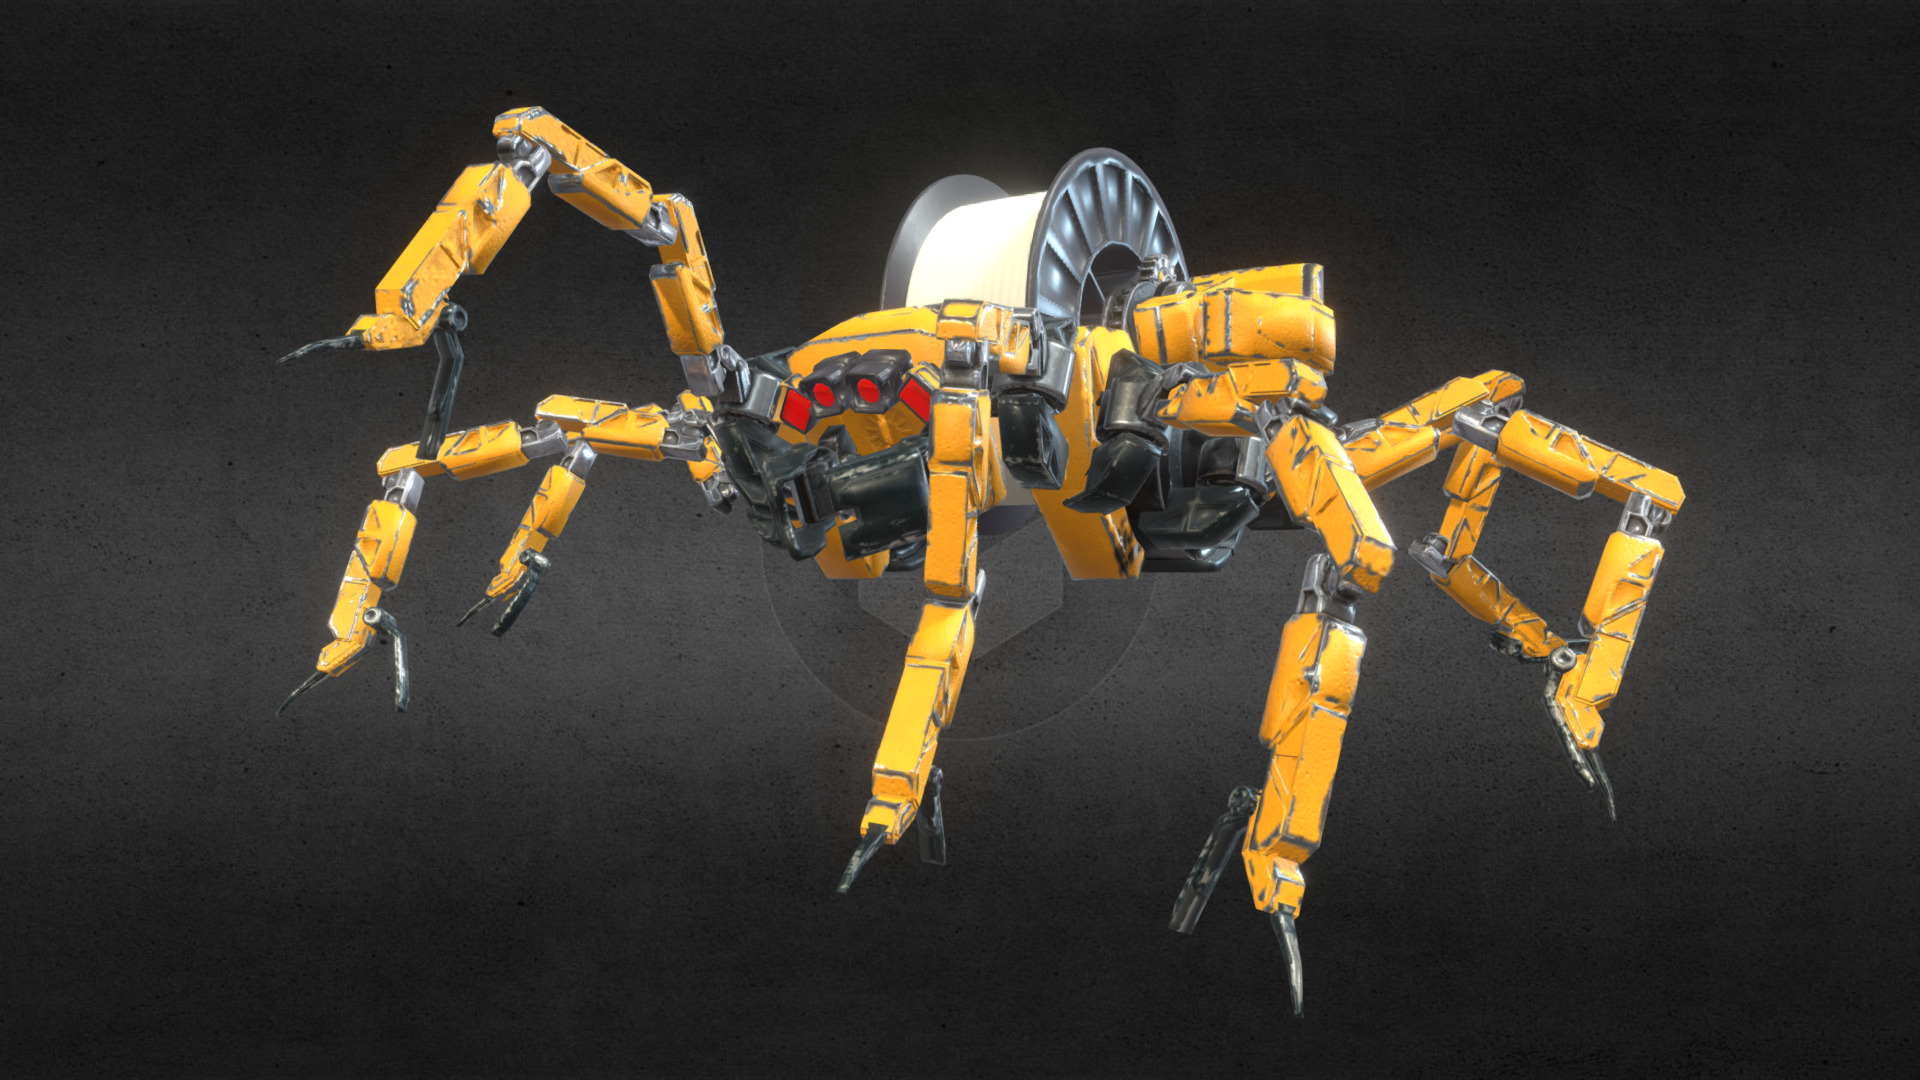 3D model Mechanical Spider - This is a 3D model of the Mechanical Spider. The 3D model is about a toy robot on a black surface.